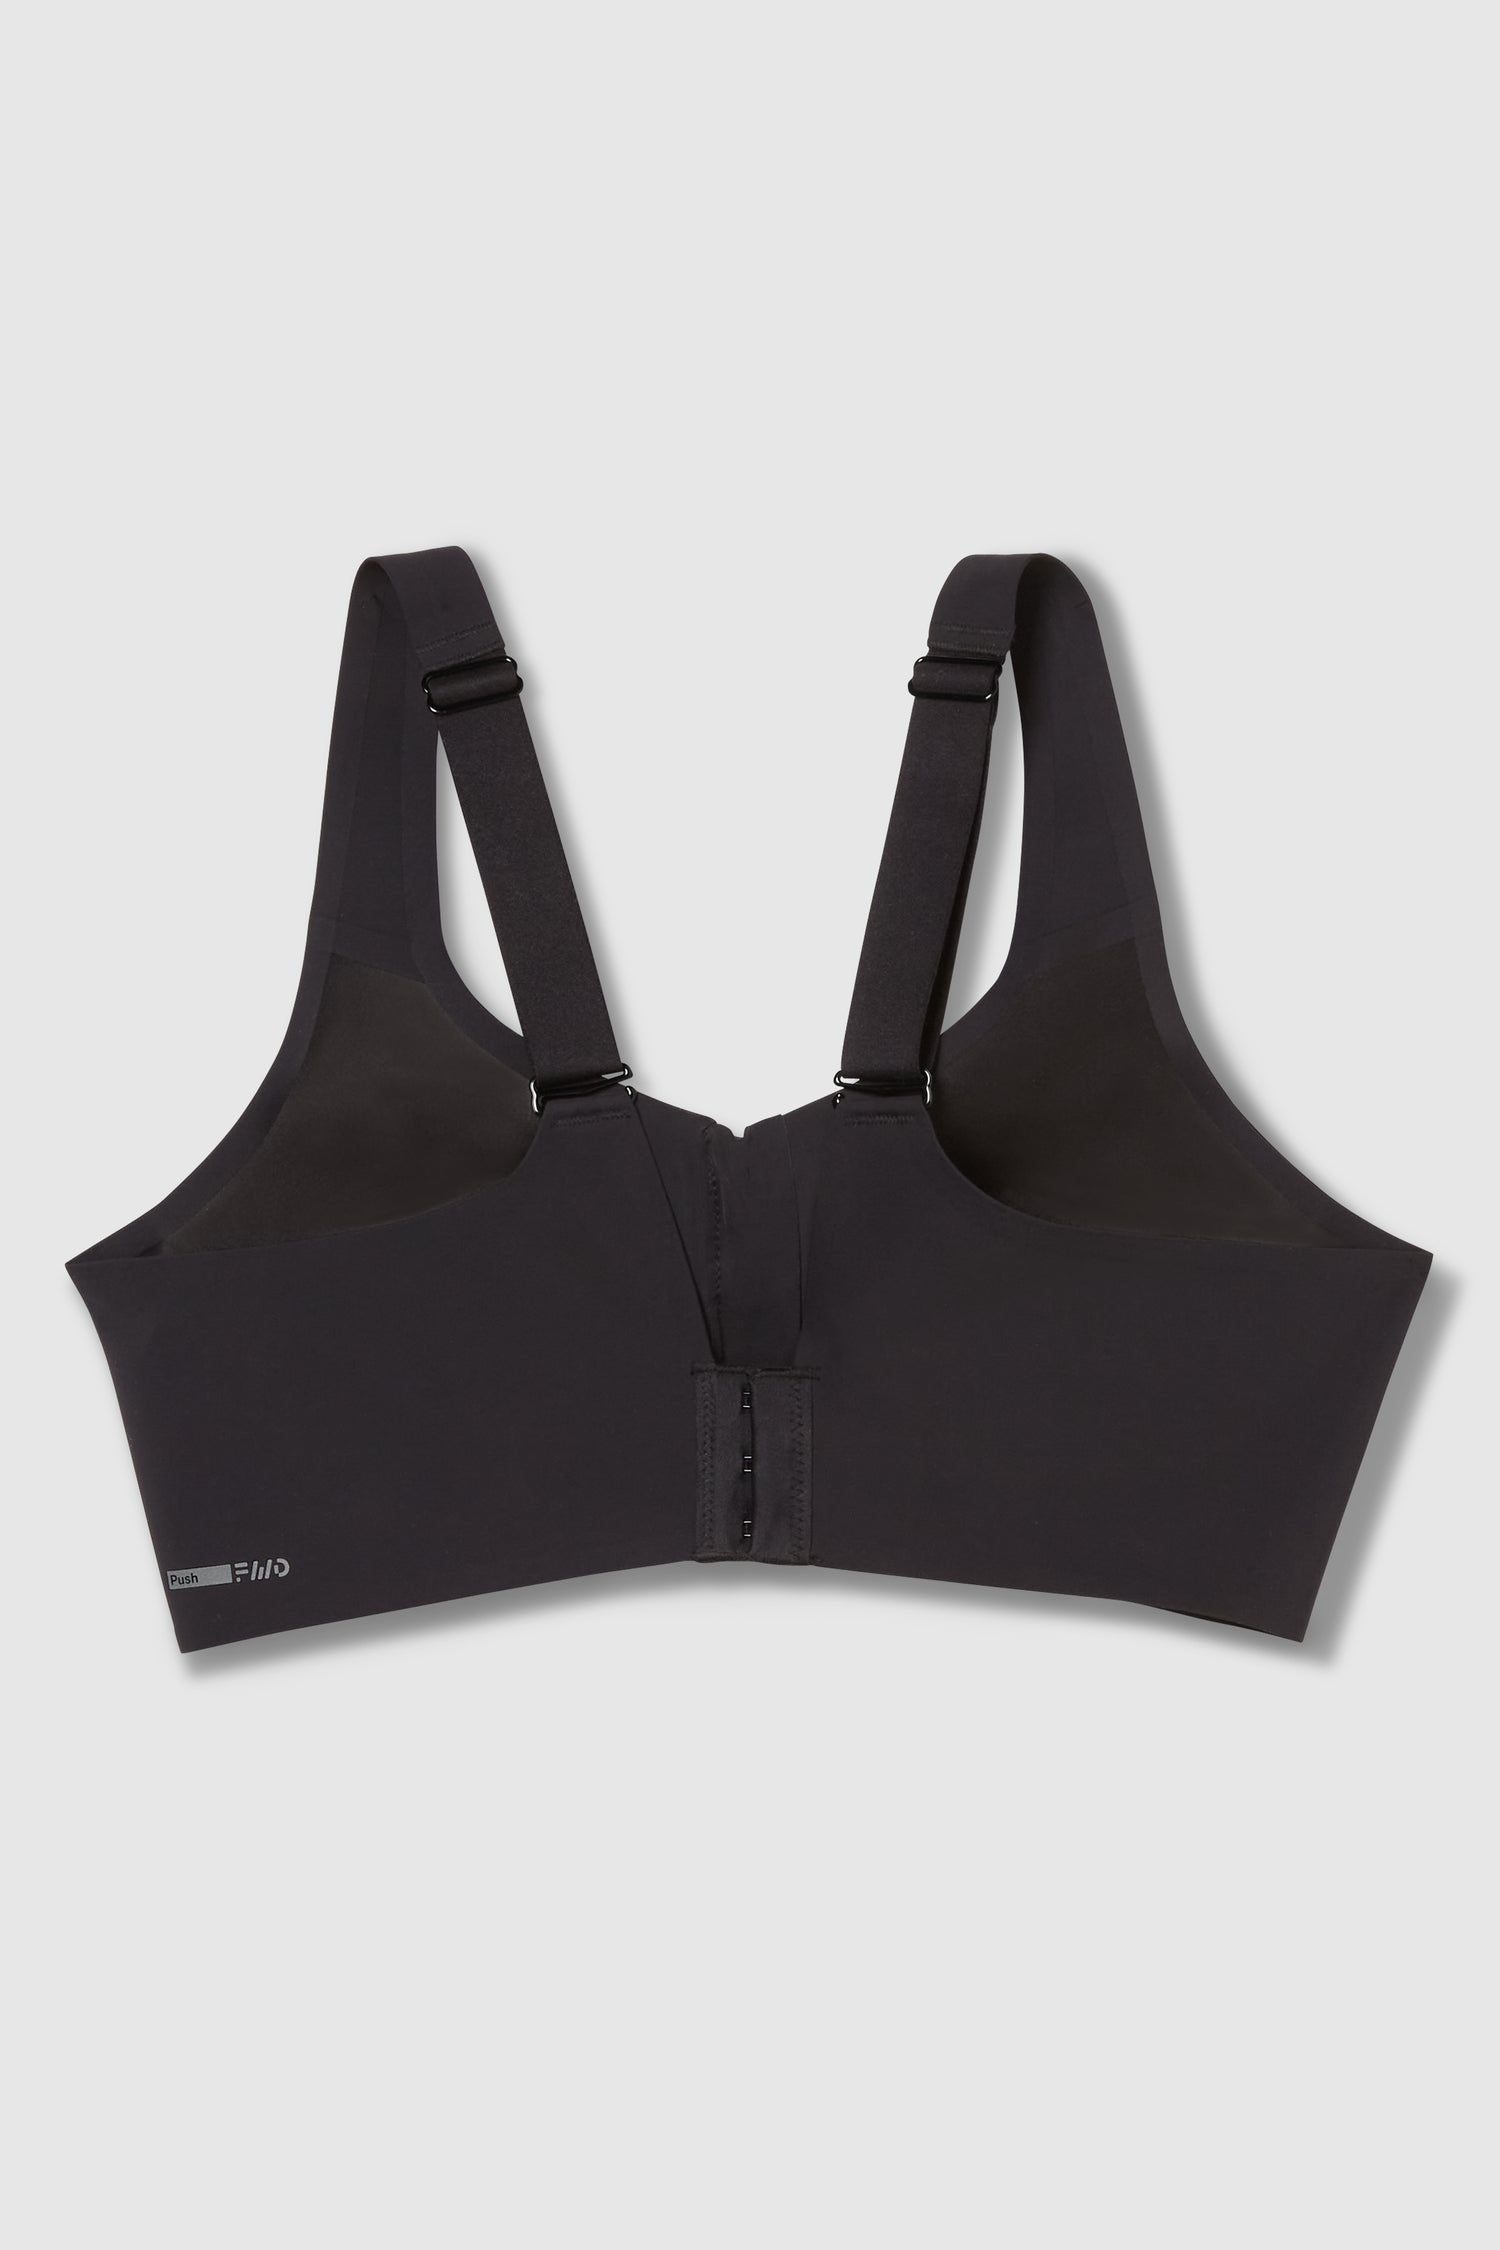 FWD Women's Strappy Sports Bra, Medium Impact, Removable Pads - BEST SELLING